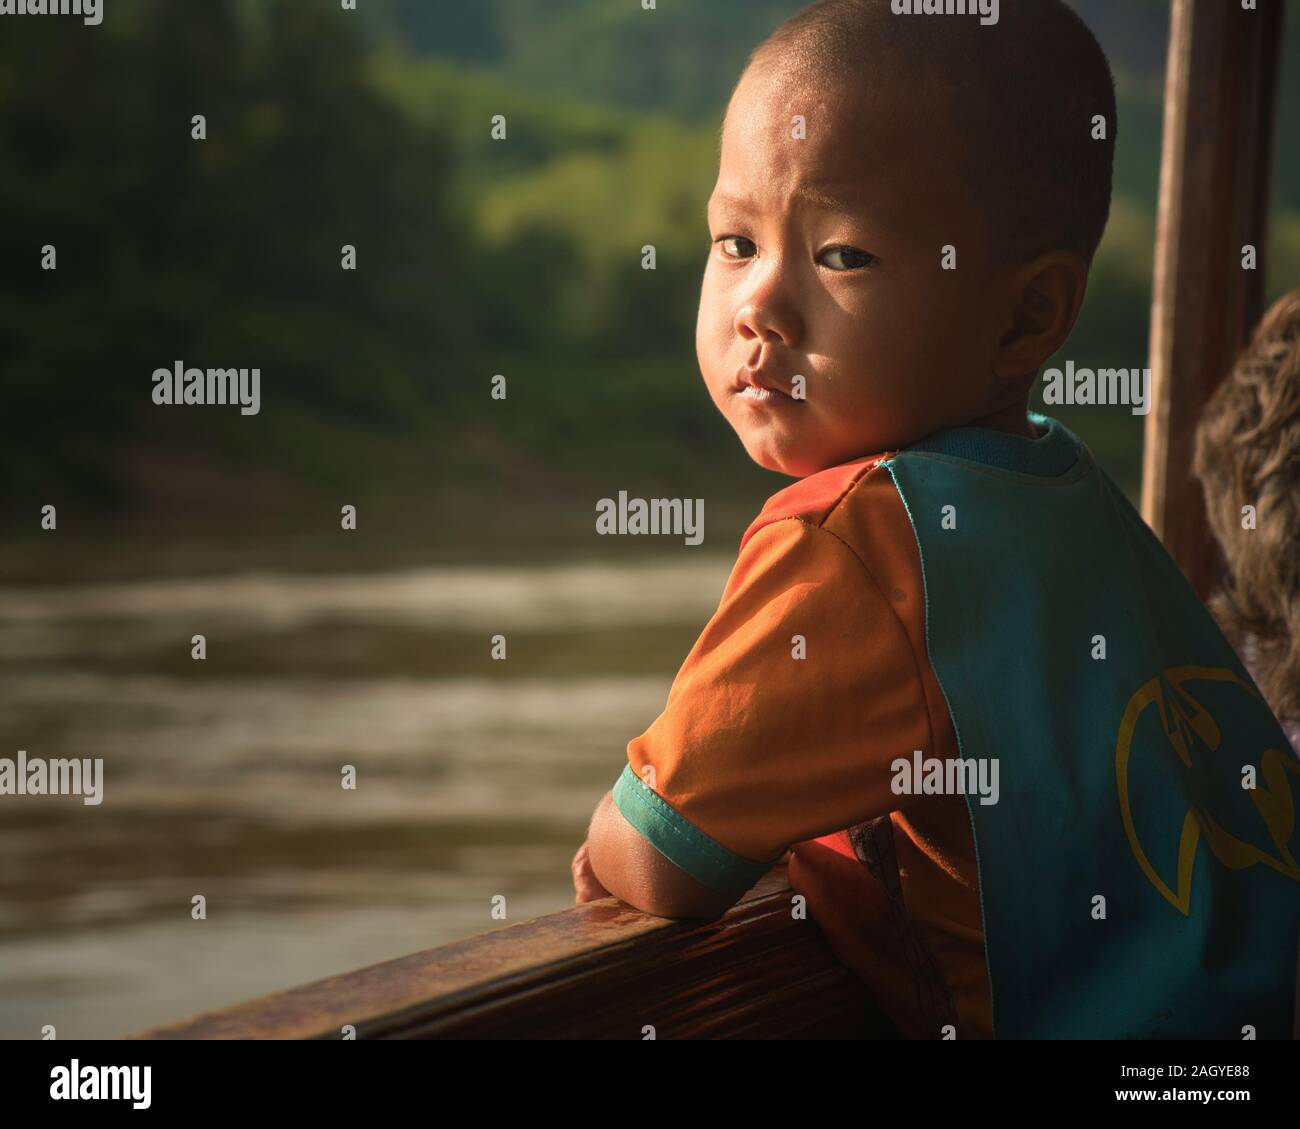 Portrait of a young Laotian boy on Mekong river boat, Laos, South East ...